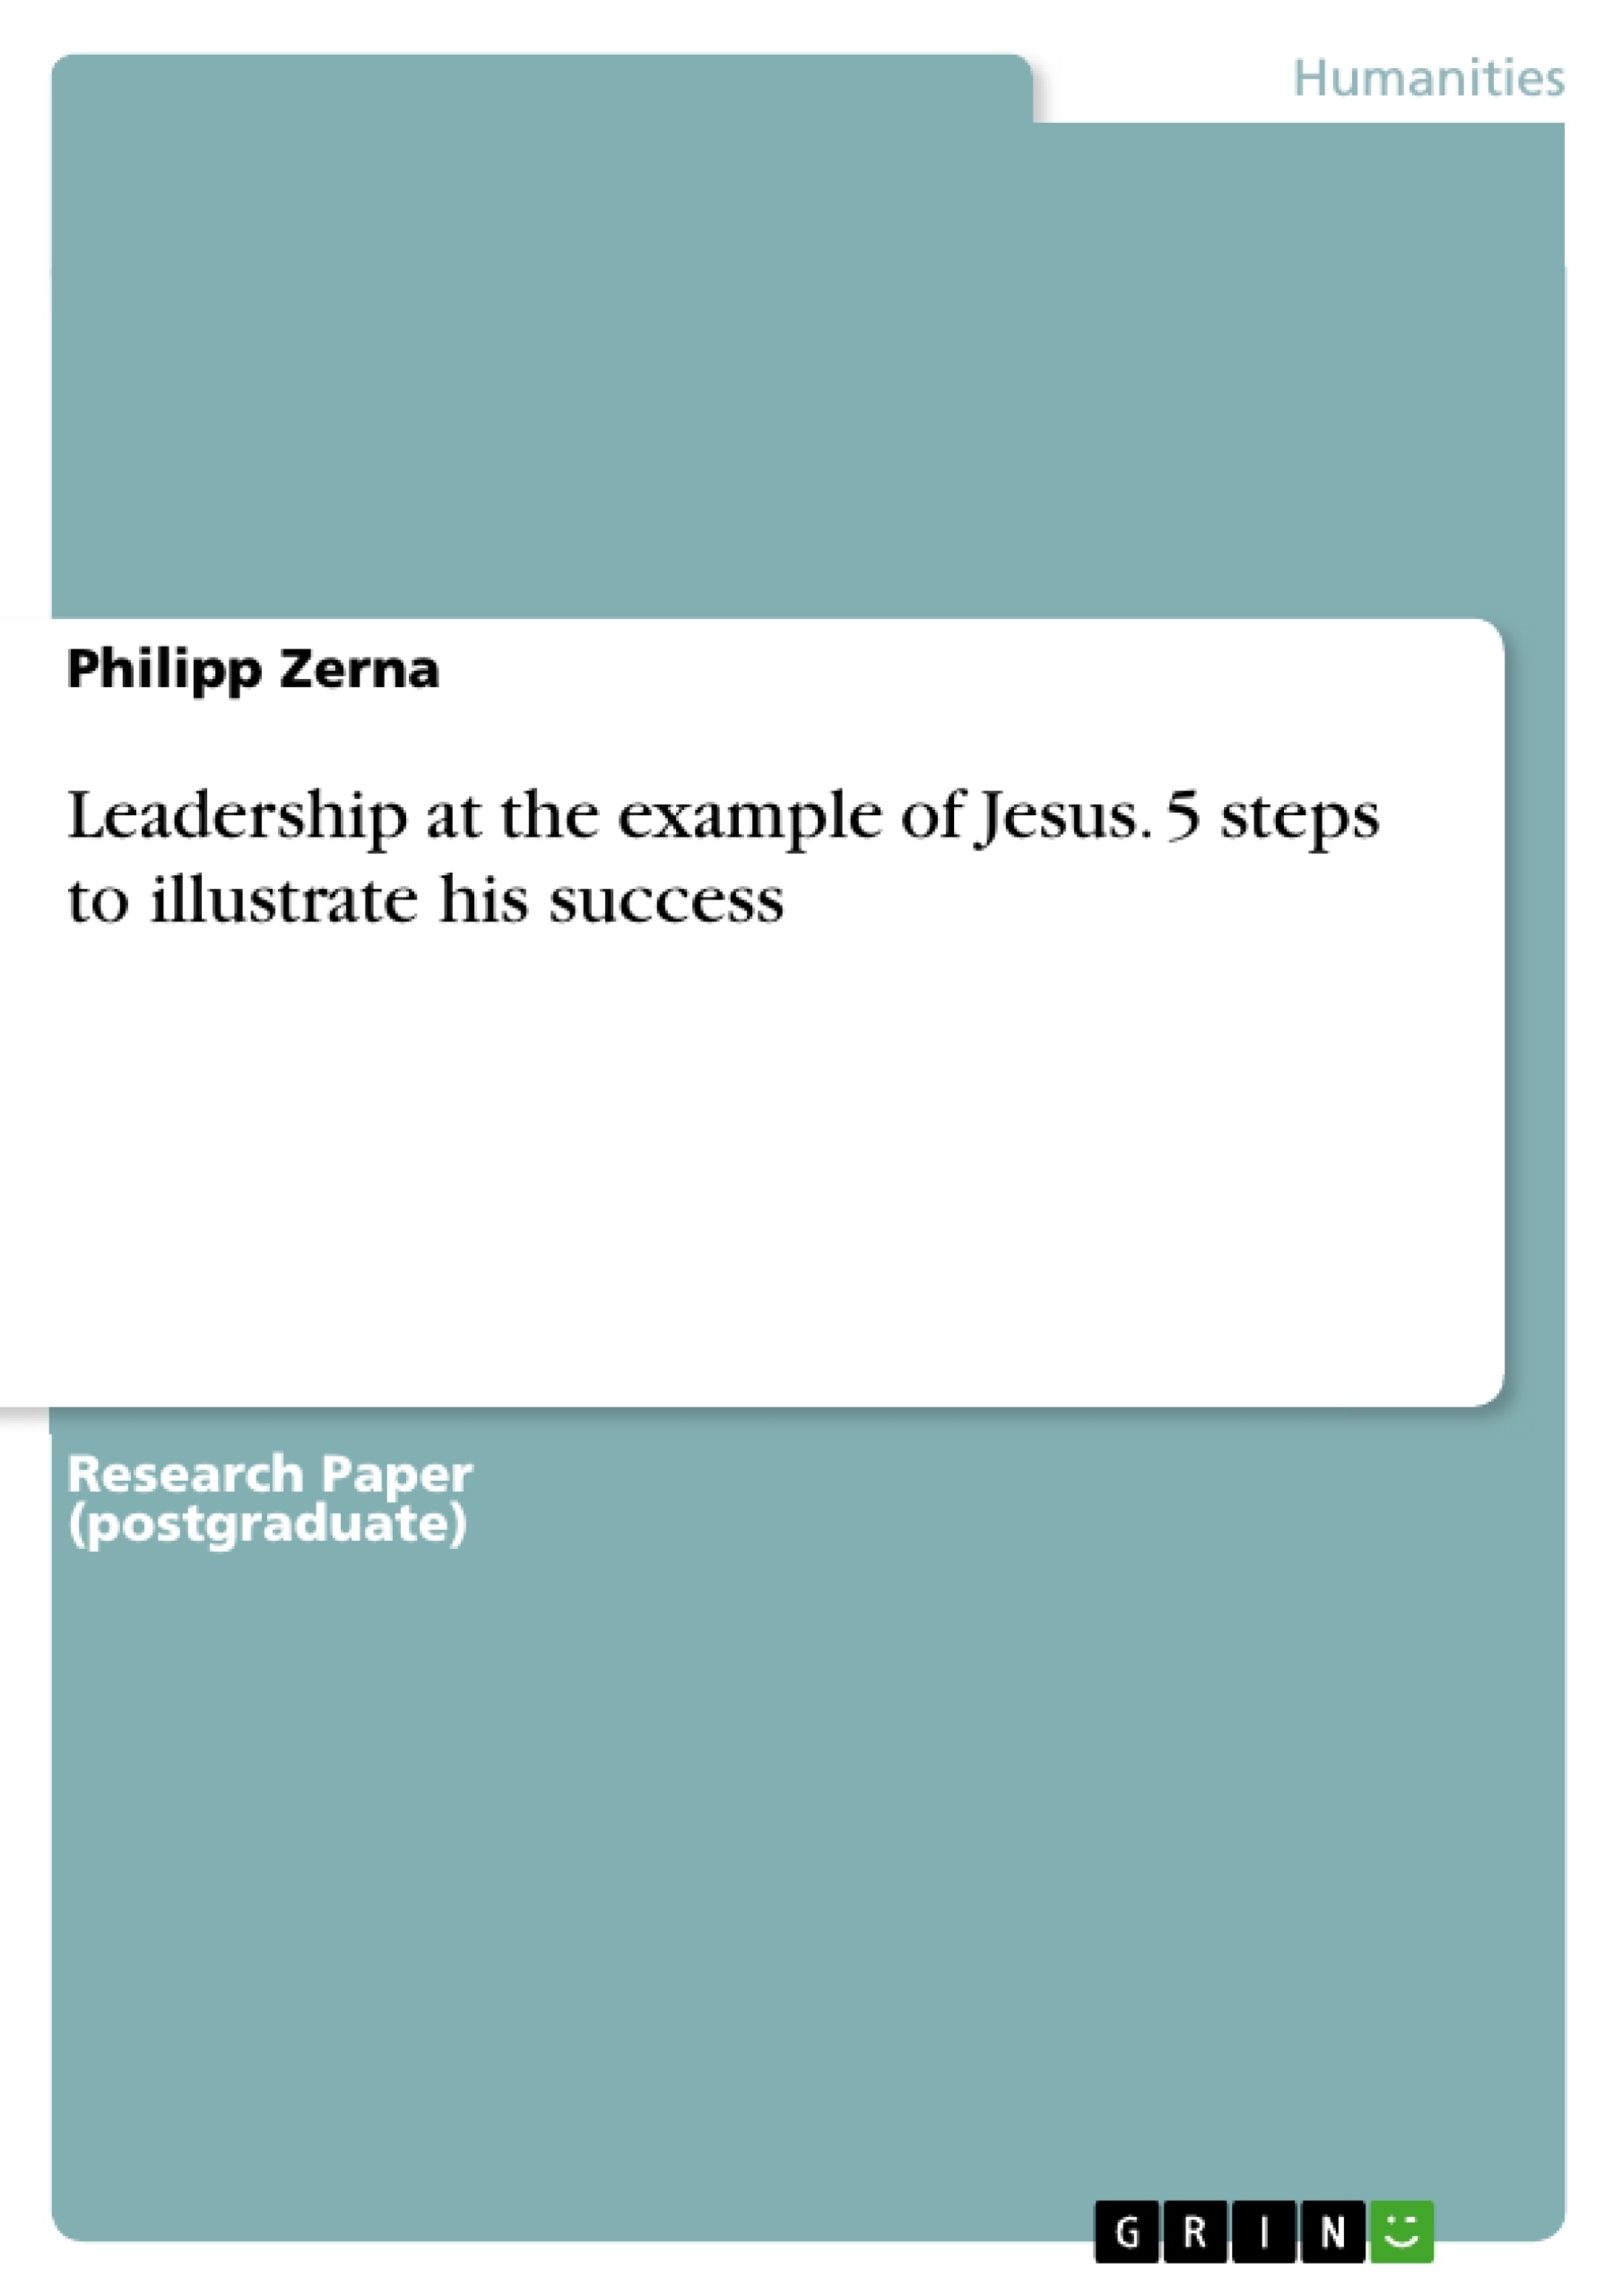 Title: Leadership at the example of Jesus. 5 steps to illustrate his success